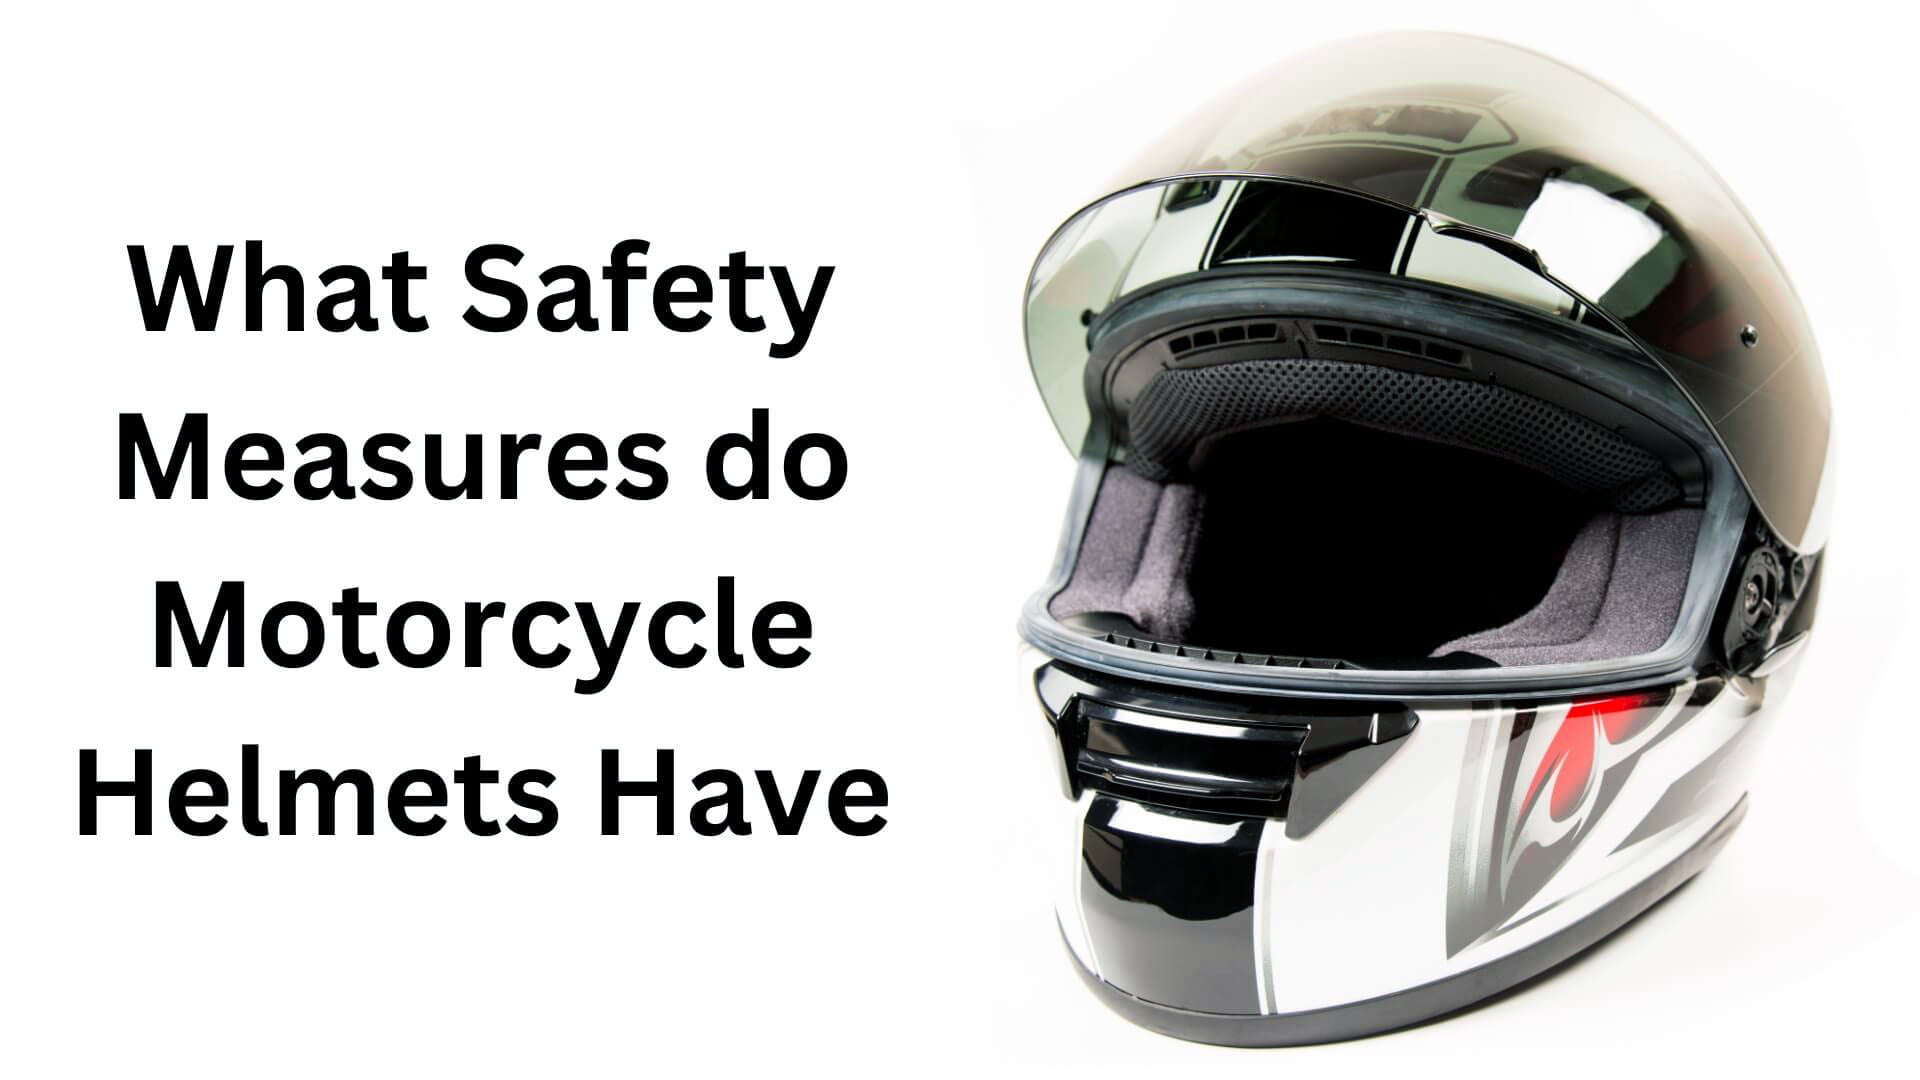 What Safety Measures do Motorcycle Helmets Have?